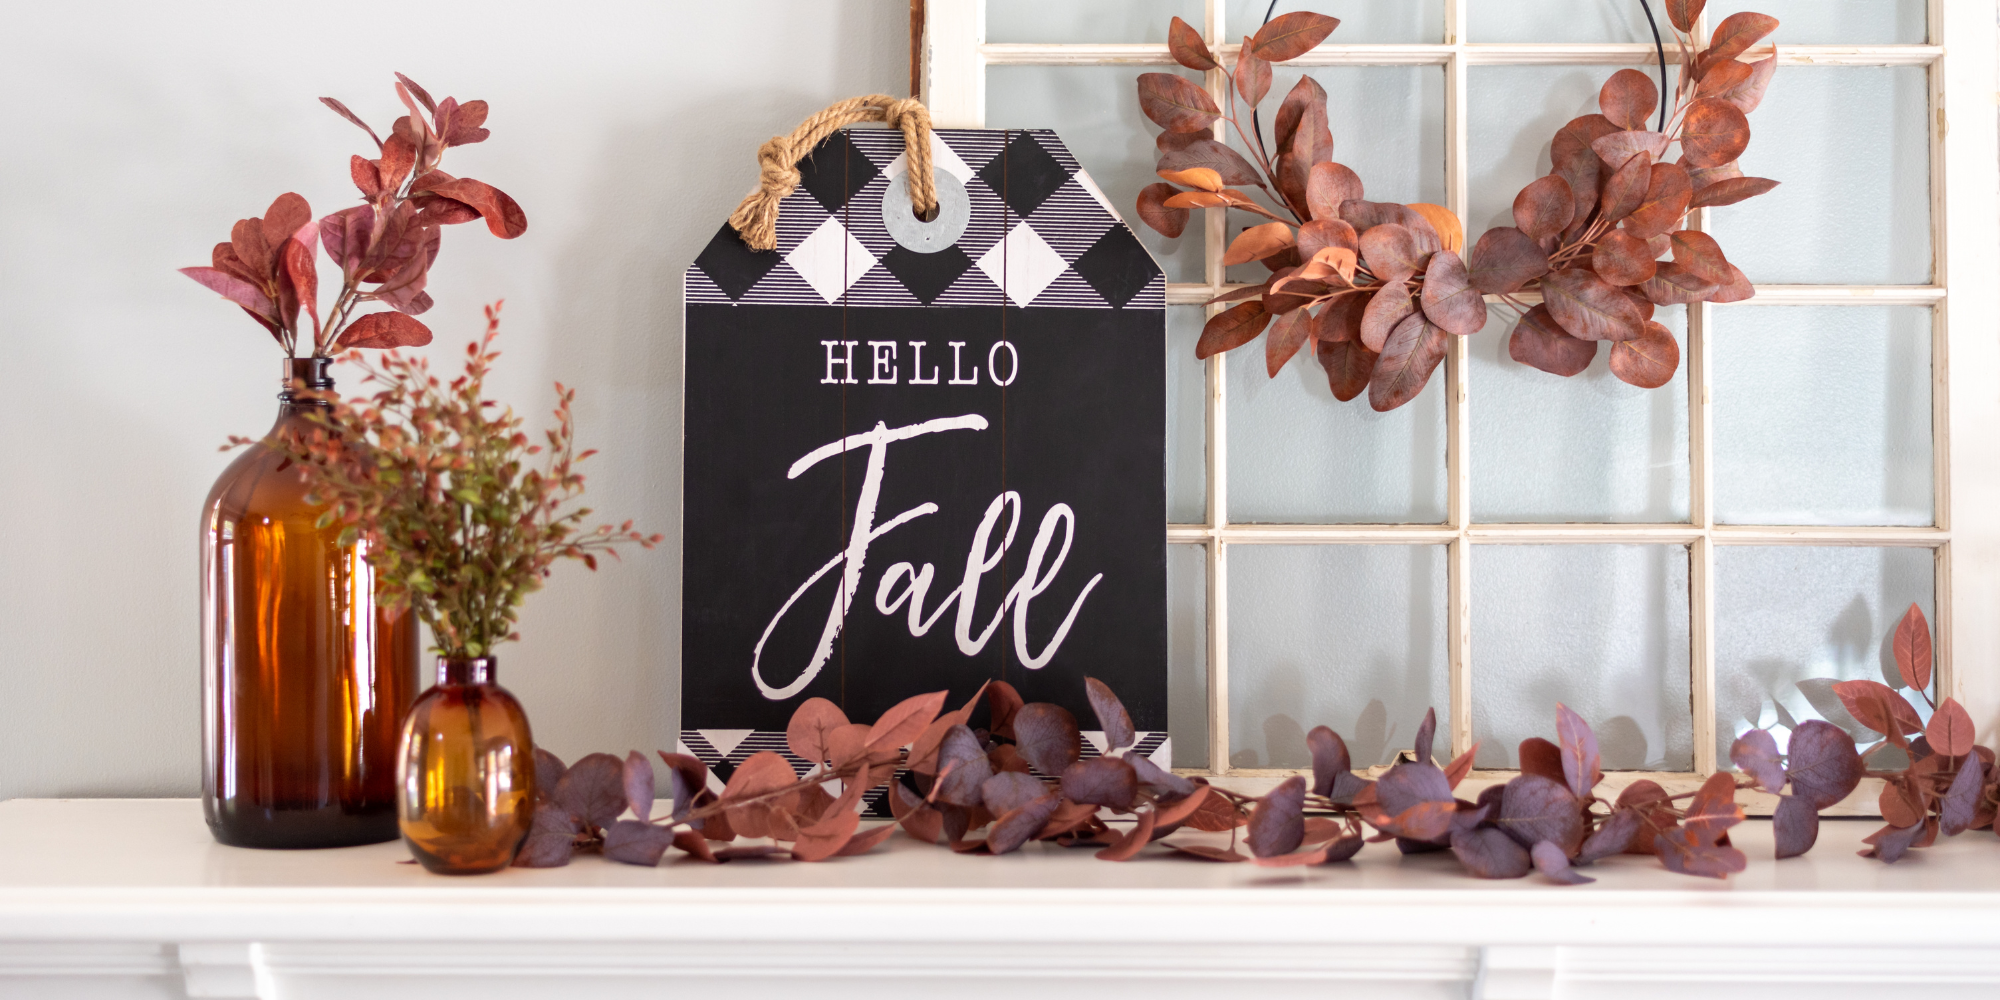 Transition Your Home Décor for the Fall Season